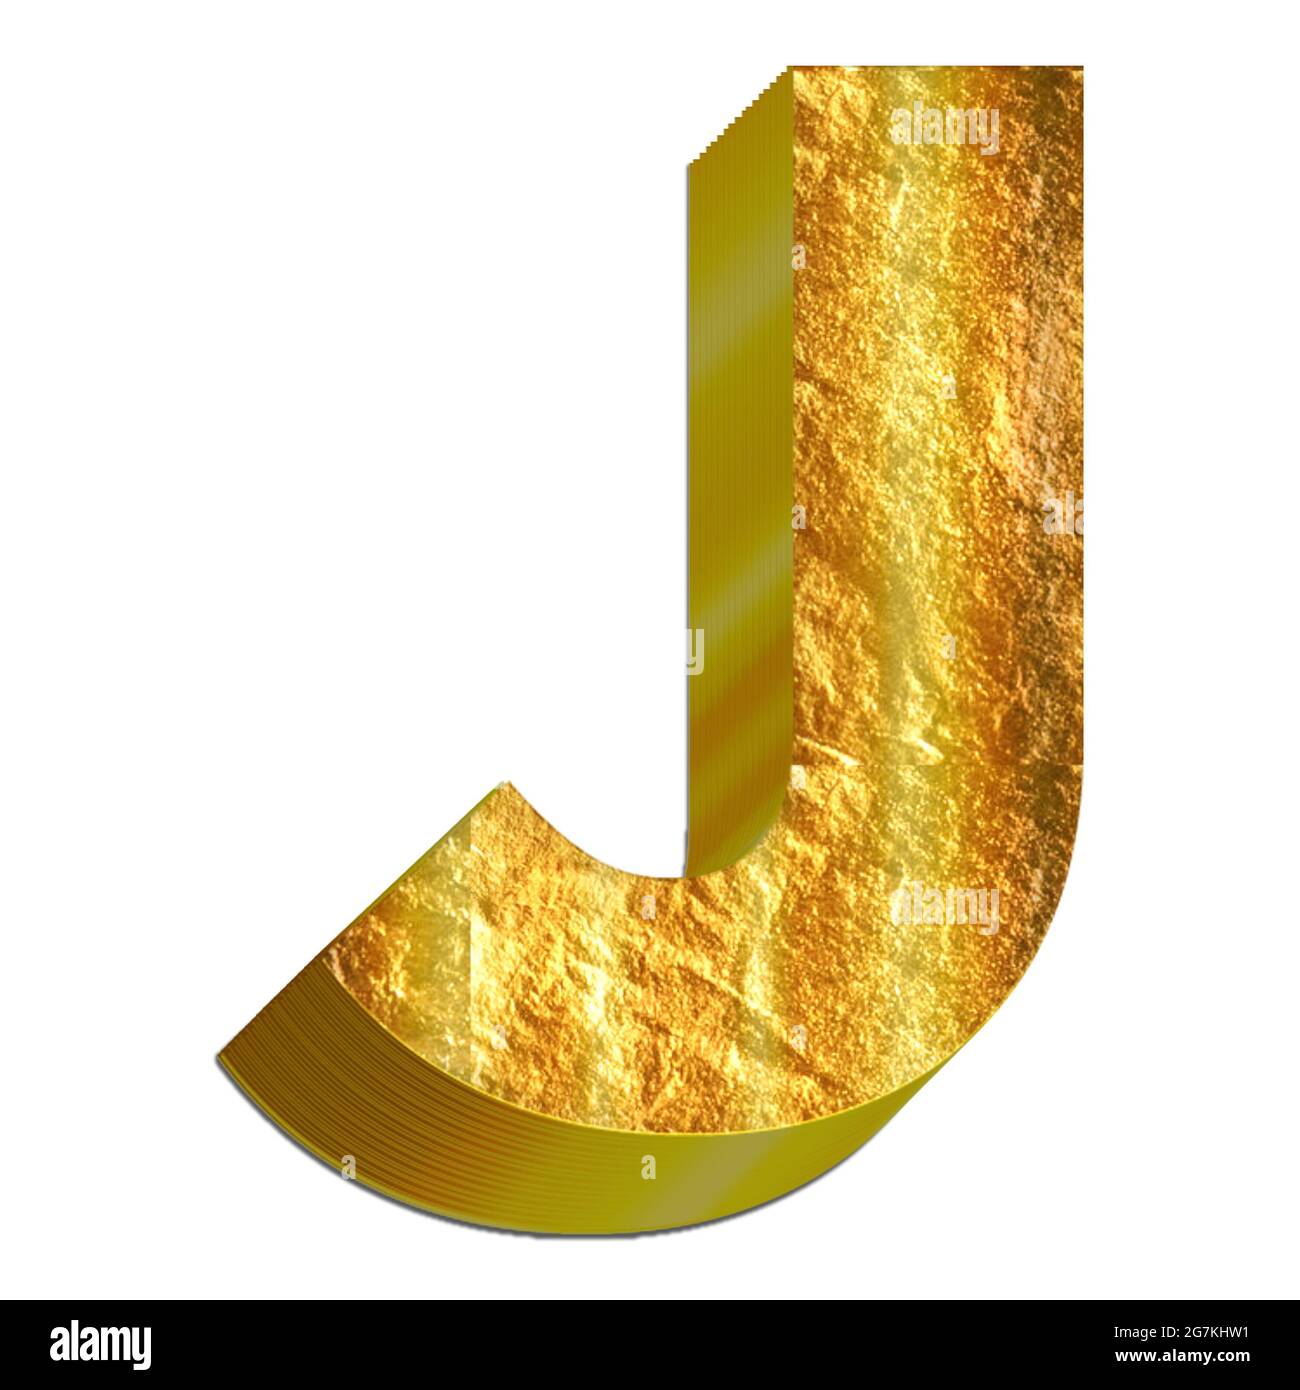 3D rendering of the golden 'J' letter isolated on white background Stock Photo